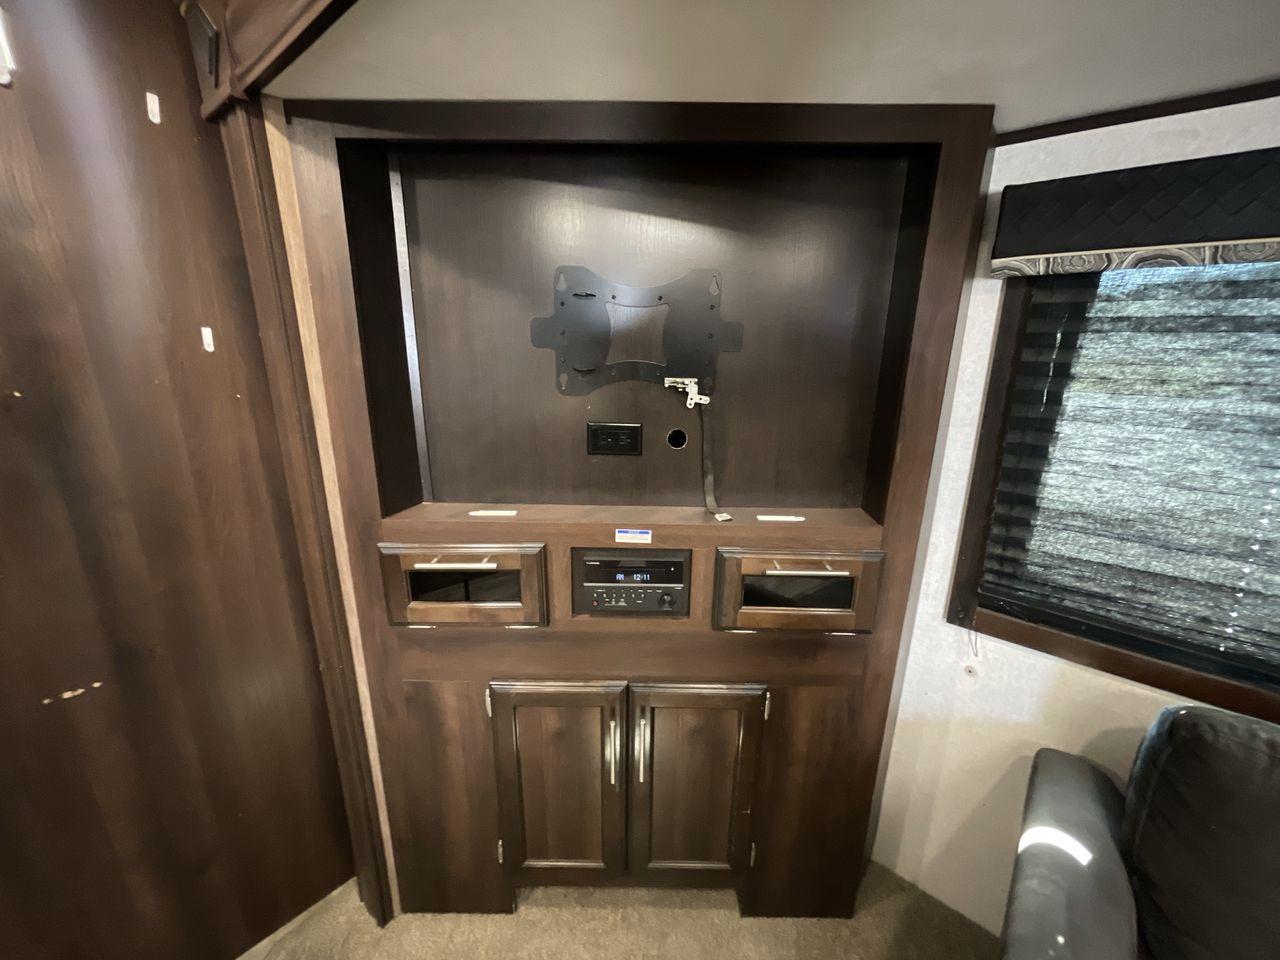 2018 WHITE JAYCO JAY FLIGHT 23MRB (1UJBJ0BN5J1) , Length: 28.17 ft | Dry Weight: 5,560 lbs. | Gross Weight: 7,250 lbs. | Slides: 1 transmission, located at 4319 N Main St, Cleburne, TX, 76033, (817) 678-5133, 32.385960, -97.391212 - The 2018 Jayco Jay Flight 23MRB is a travel trailer that encapsulates both compactness and luxury for unparalleled camping experiences. Spanning 28 feet in length, this model boasts a thoughtfully arranged interior featuring a single slide-out, seamlessly amplifying the living space. The Jay Flight - Photo #19